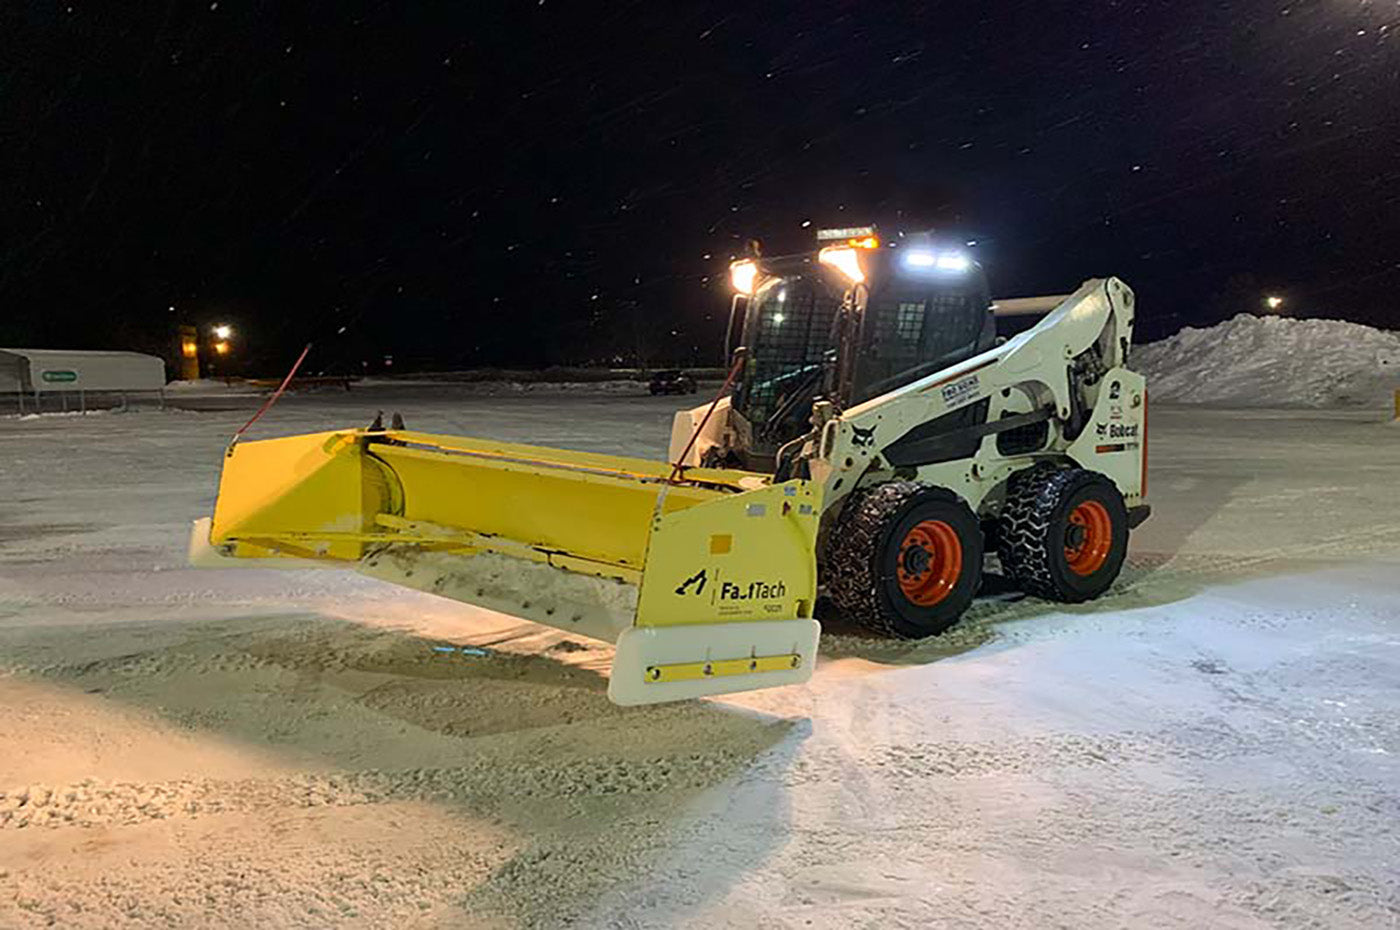 An image of a snowplow with additional plastic that is the same material used to create C&A Pro skis